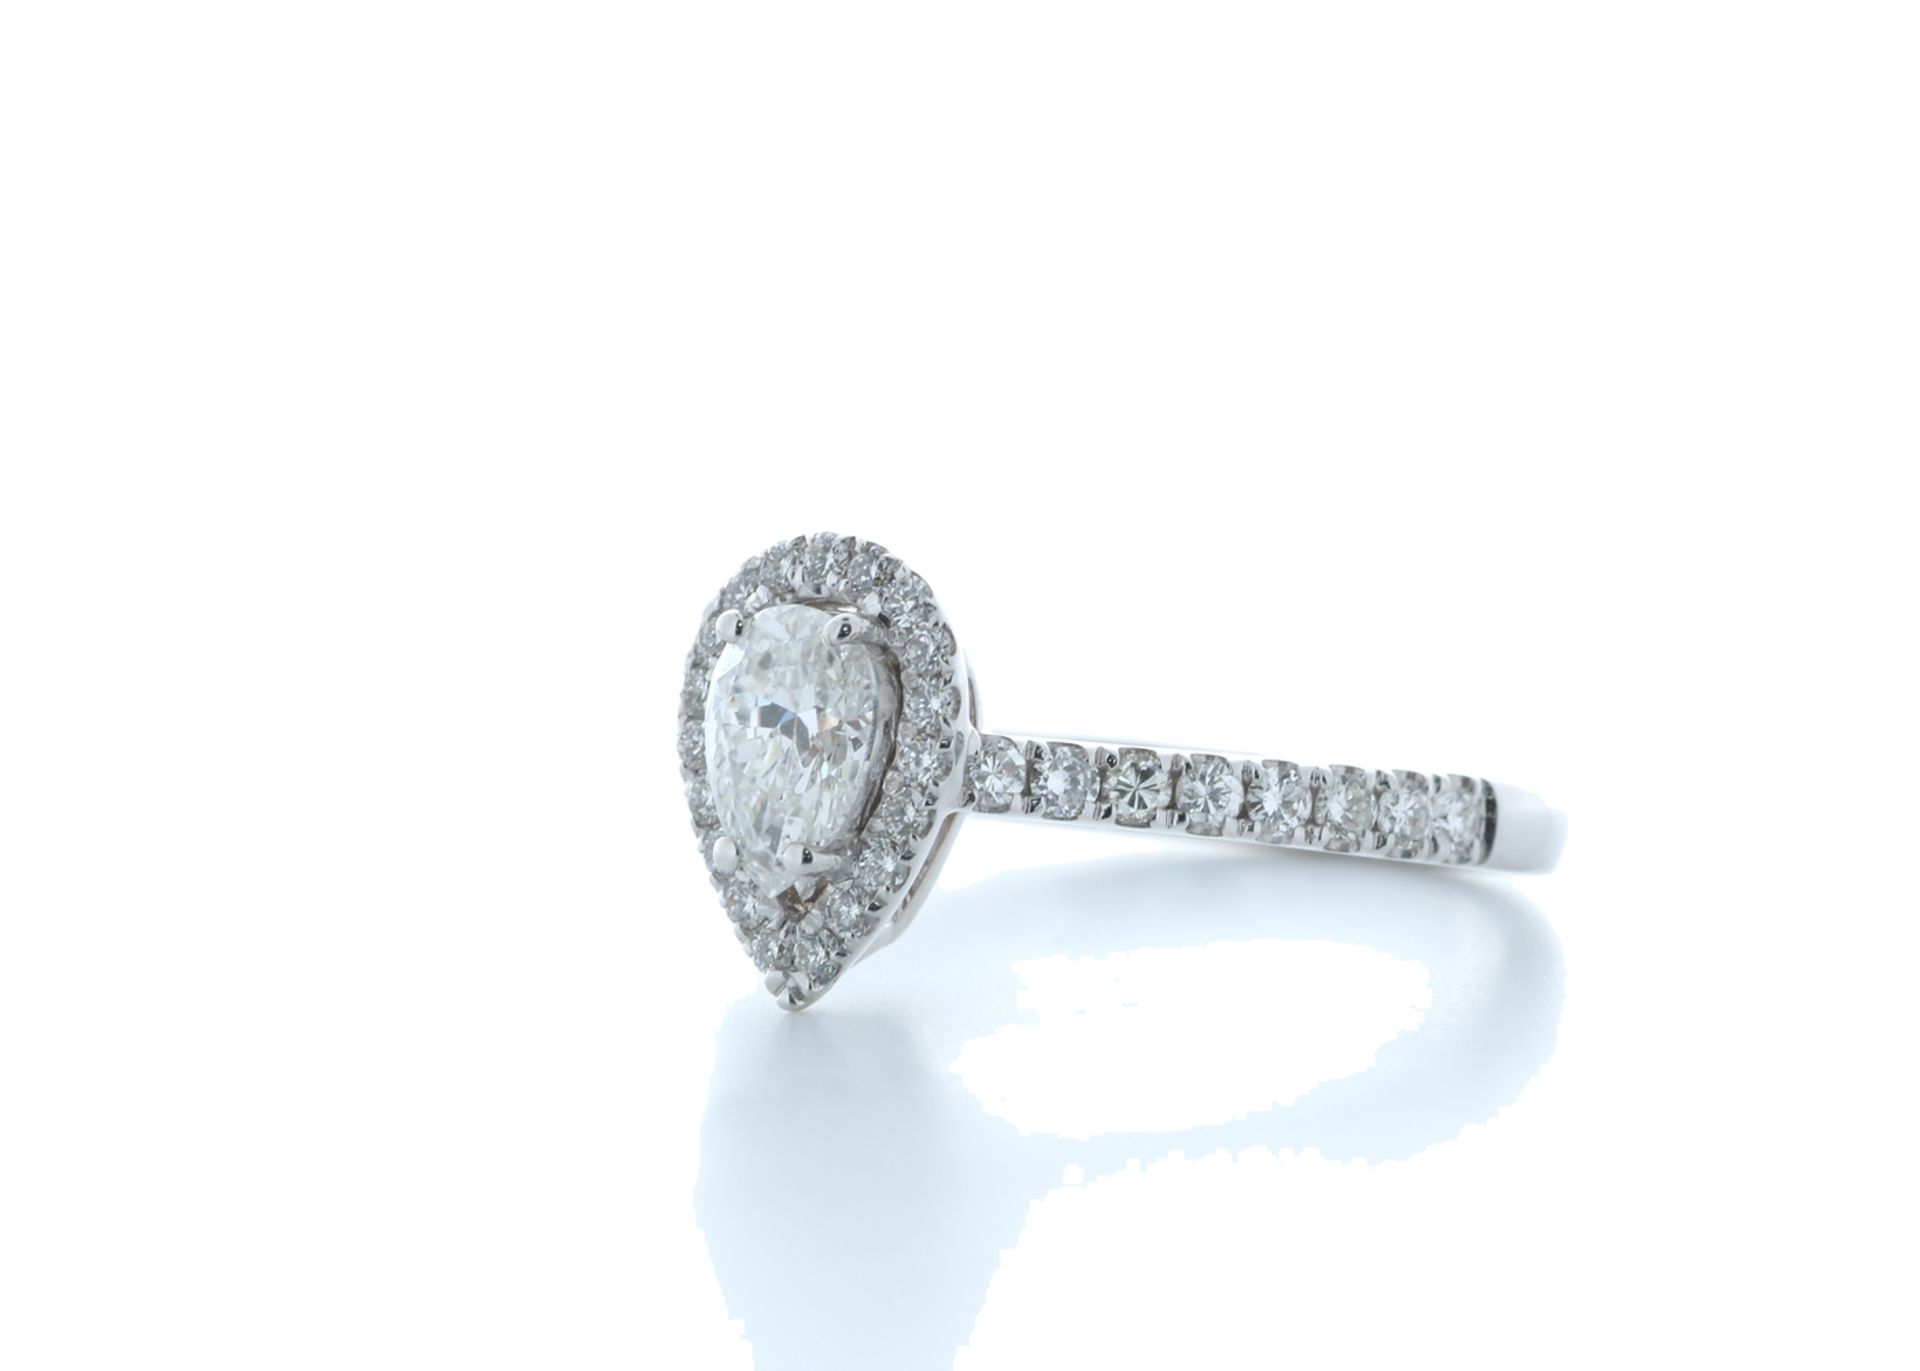 18ct White Gold Single Stone With Halo Setting Ring 0.91 (0.51) Carats - Valued by IDI £6,250.00 - - Image 2 of 5